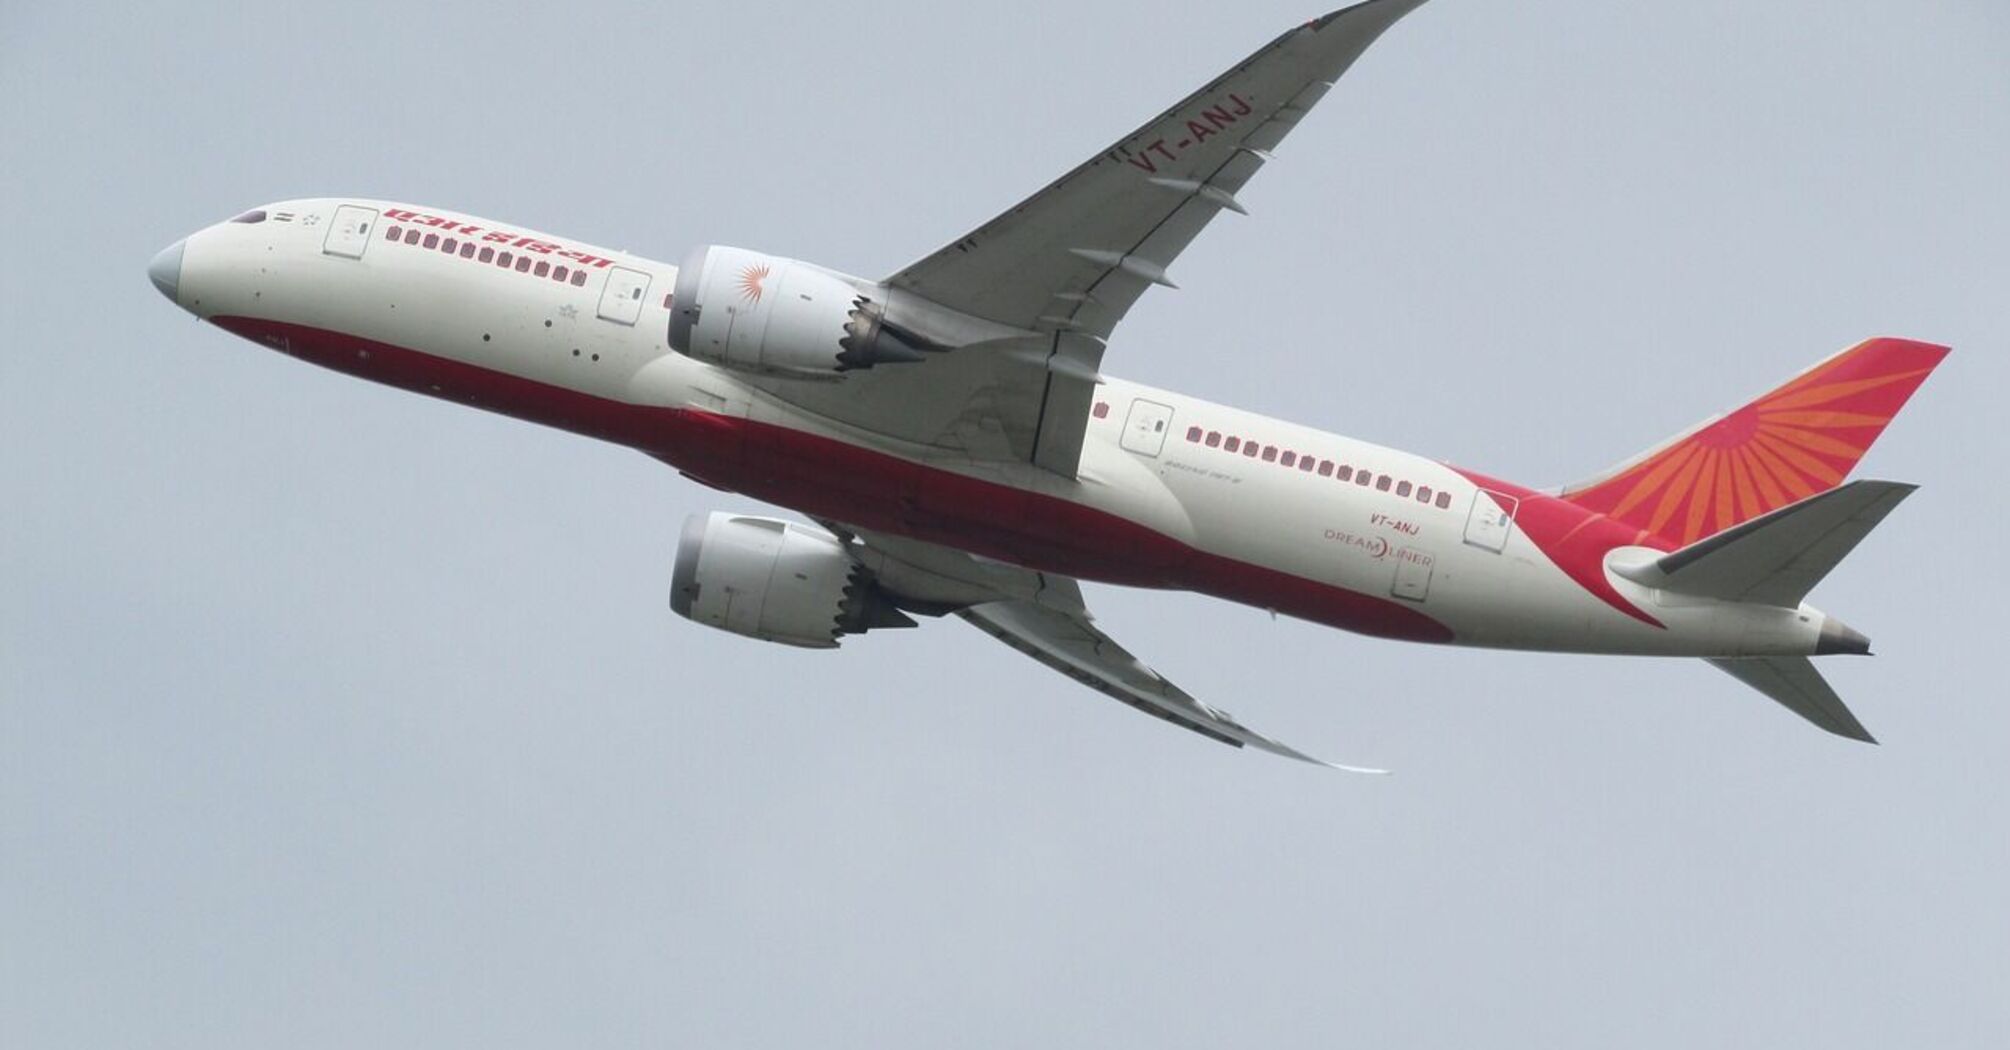 Air India Express, Akasa Air and SpiceJet are required to check Boeing 737 MAX 8 aircraft: the reason